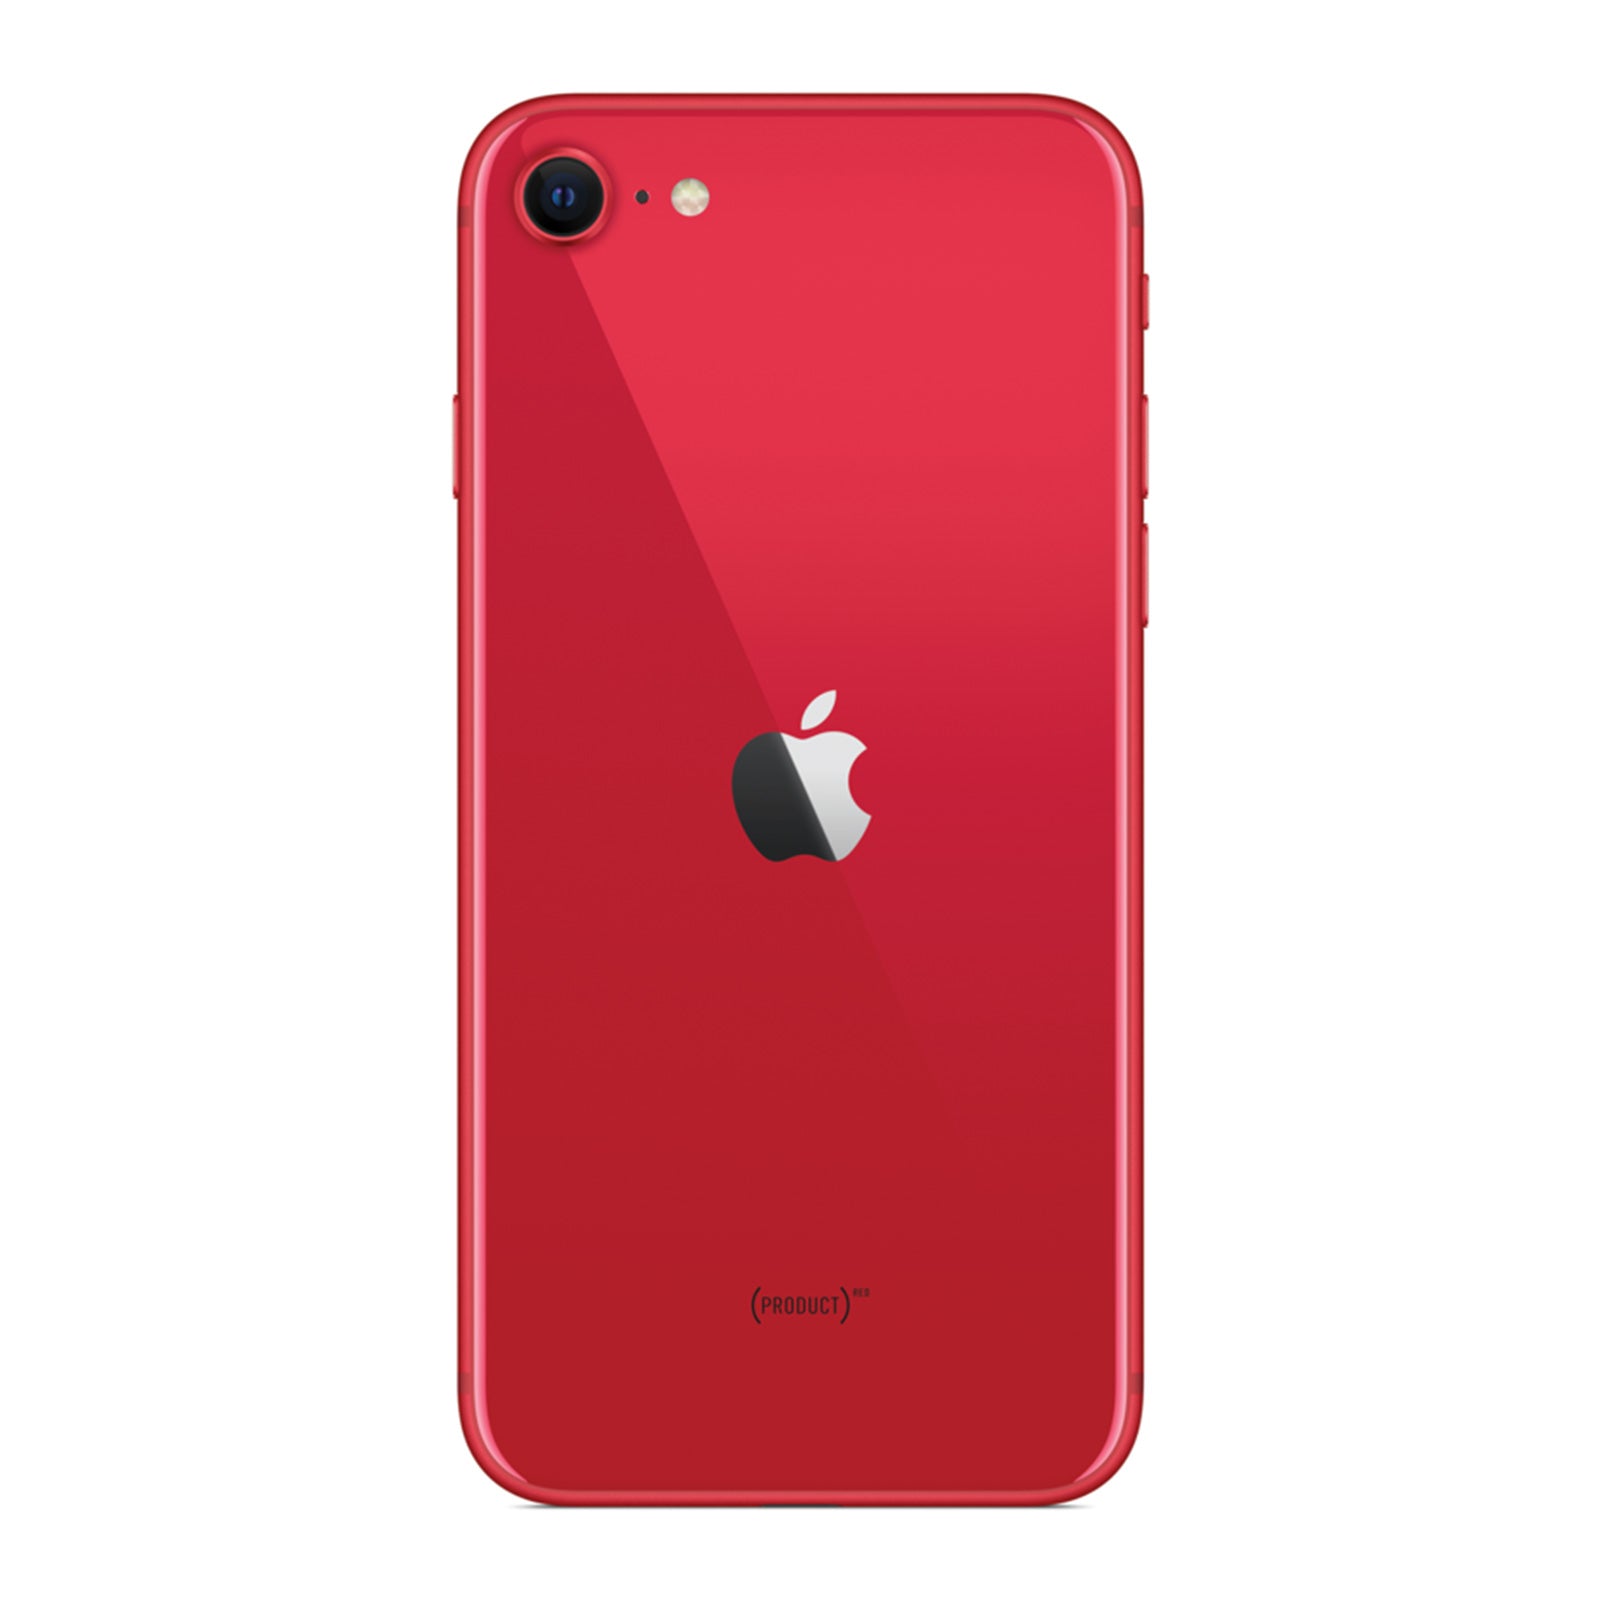 Apple iPhone SE 2nd Gen 256GB Product Red Fair AT&T